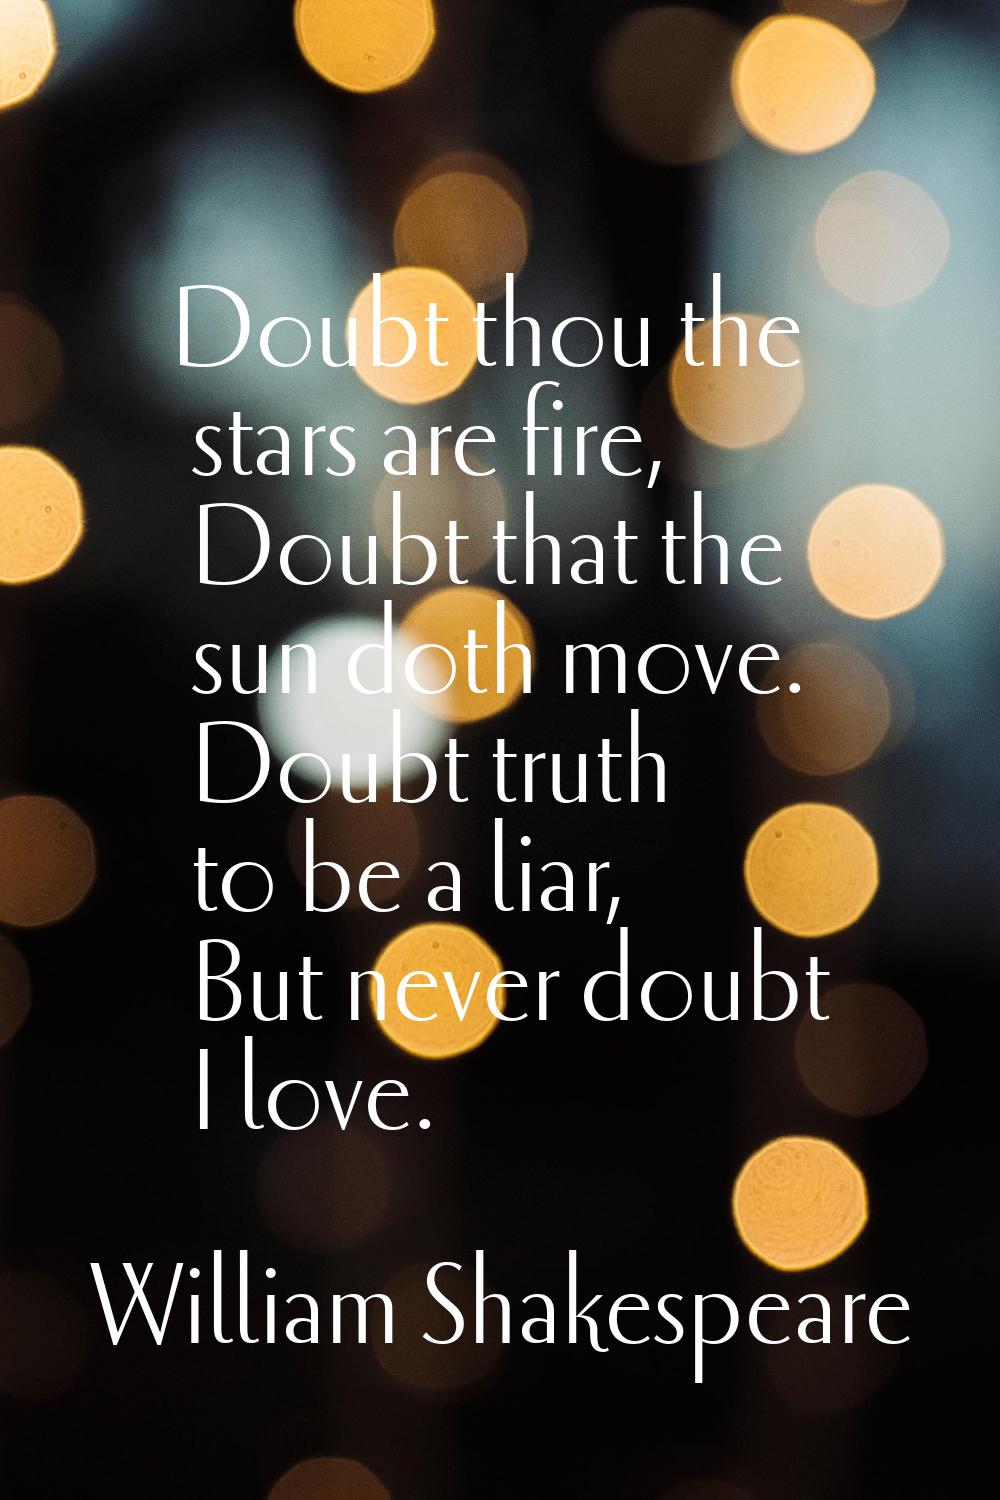 Doubt thou the stars are fire, Doubt that the sun doth move. Doubt truth to be a liar, But never do